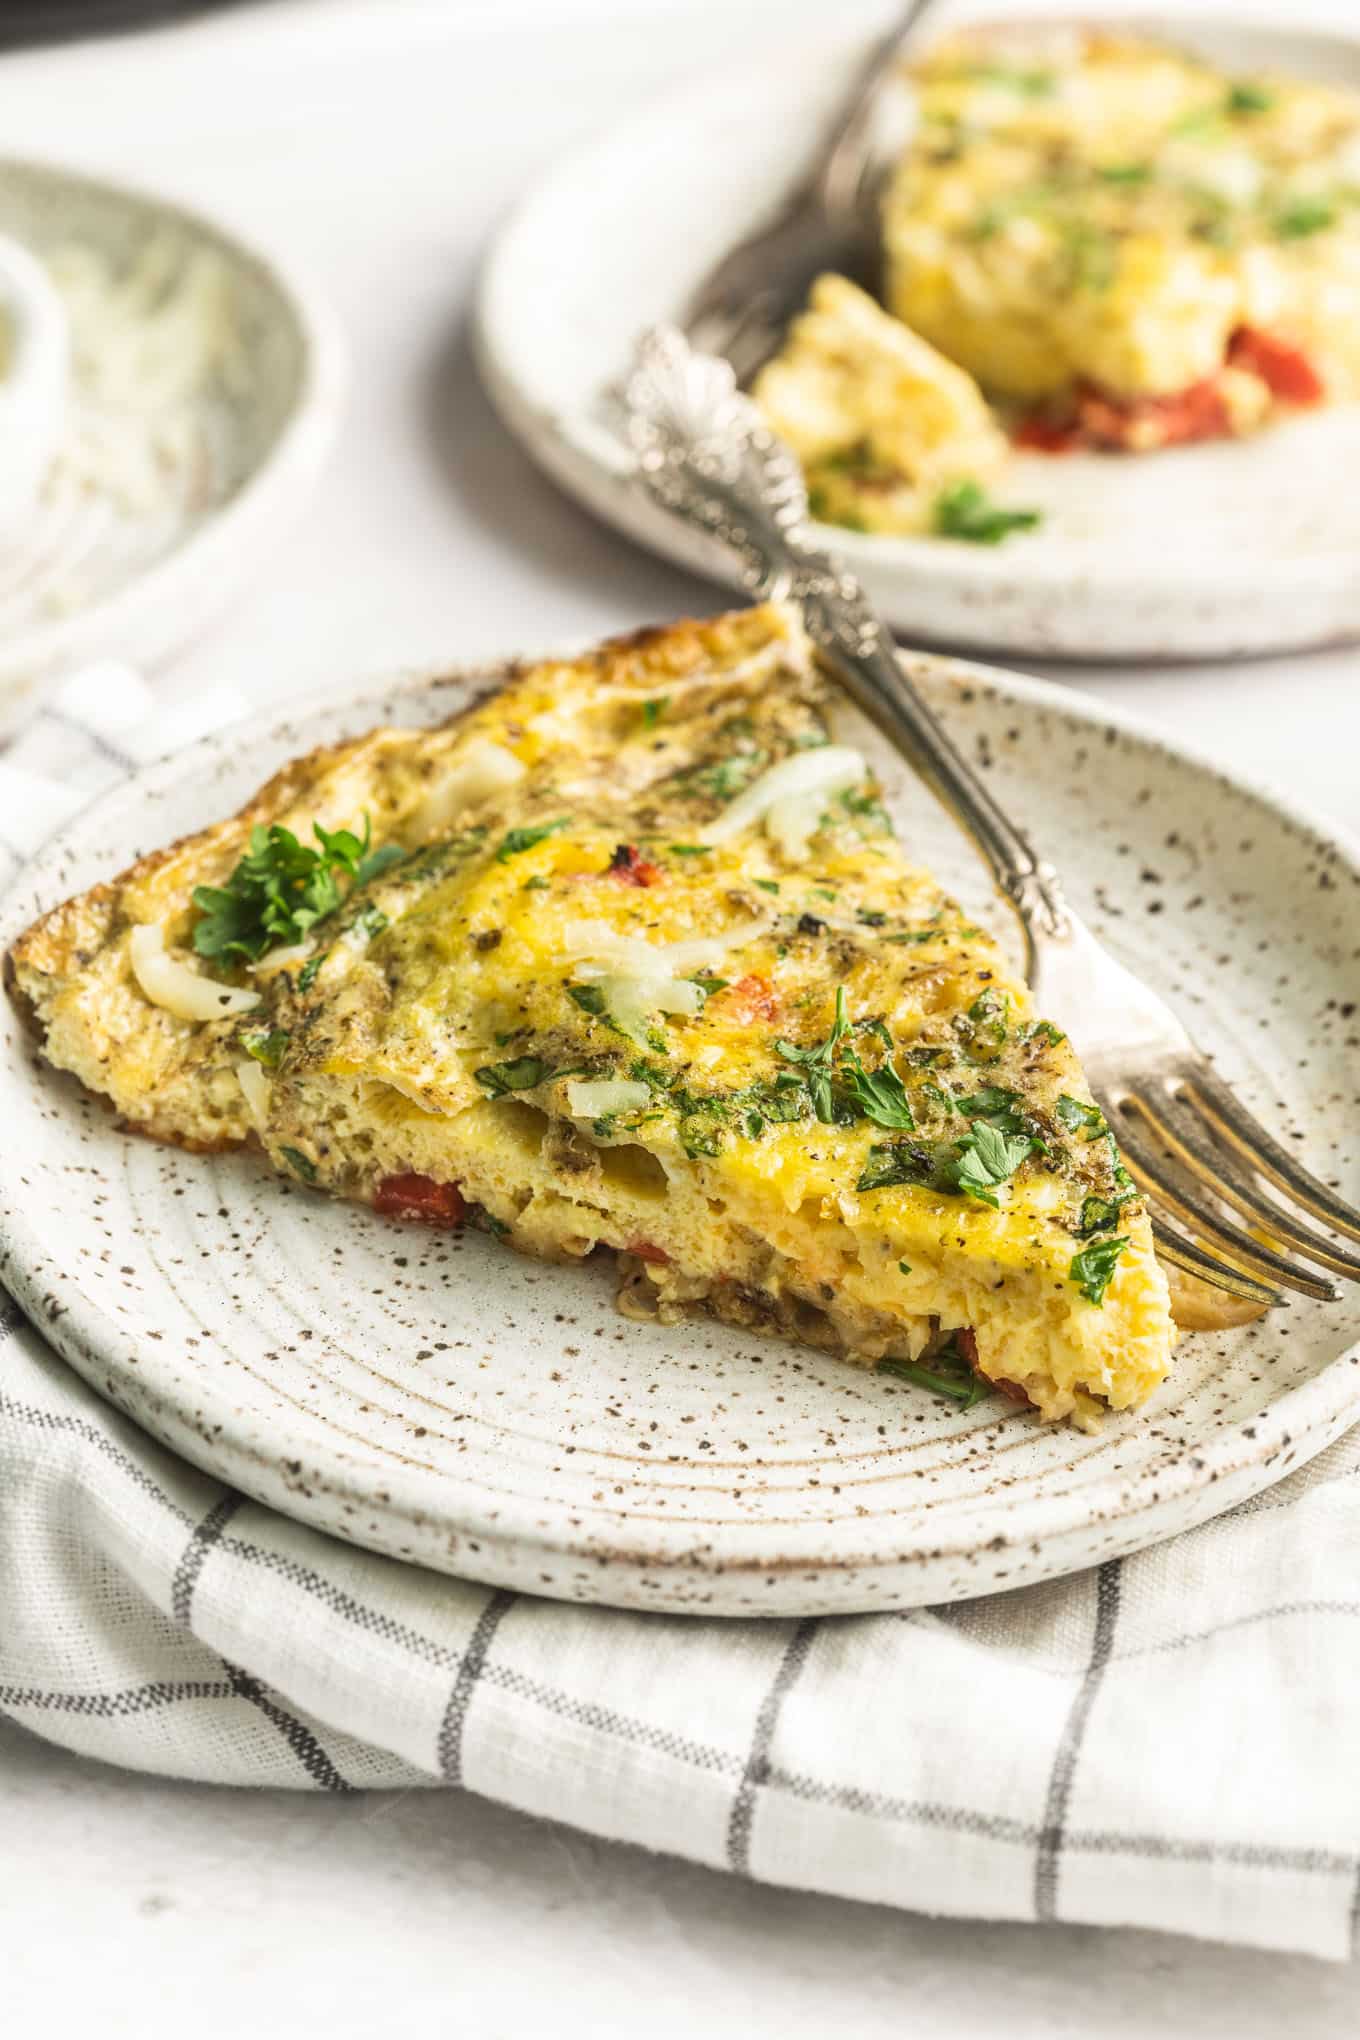 Best Frittata Pan Reviews, Comparison and Guide